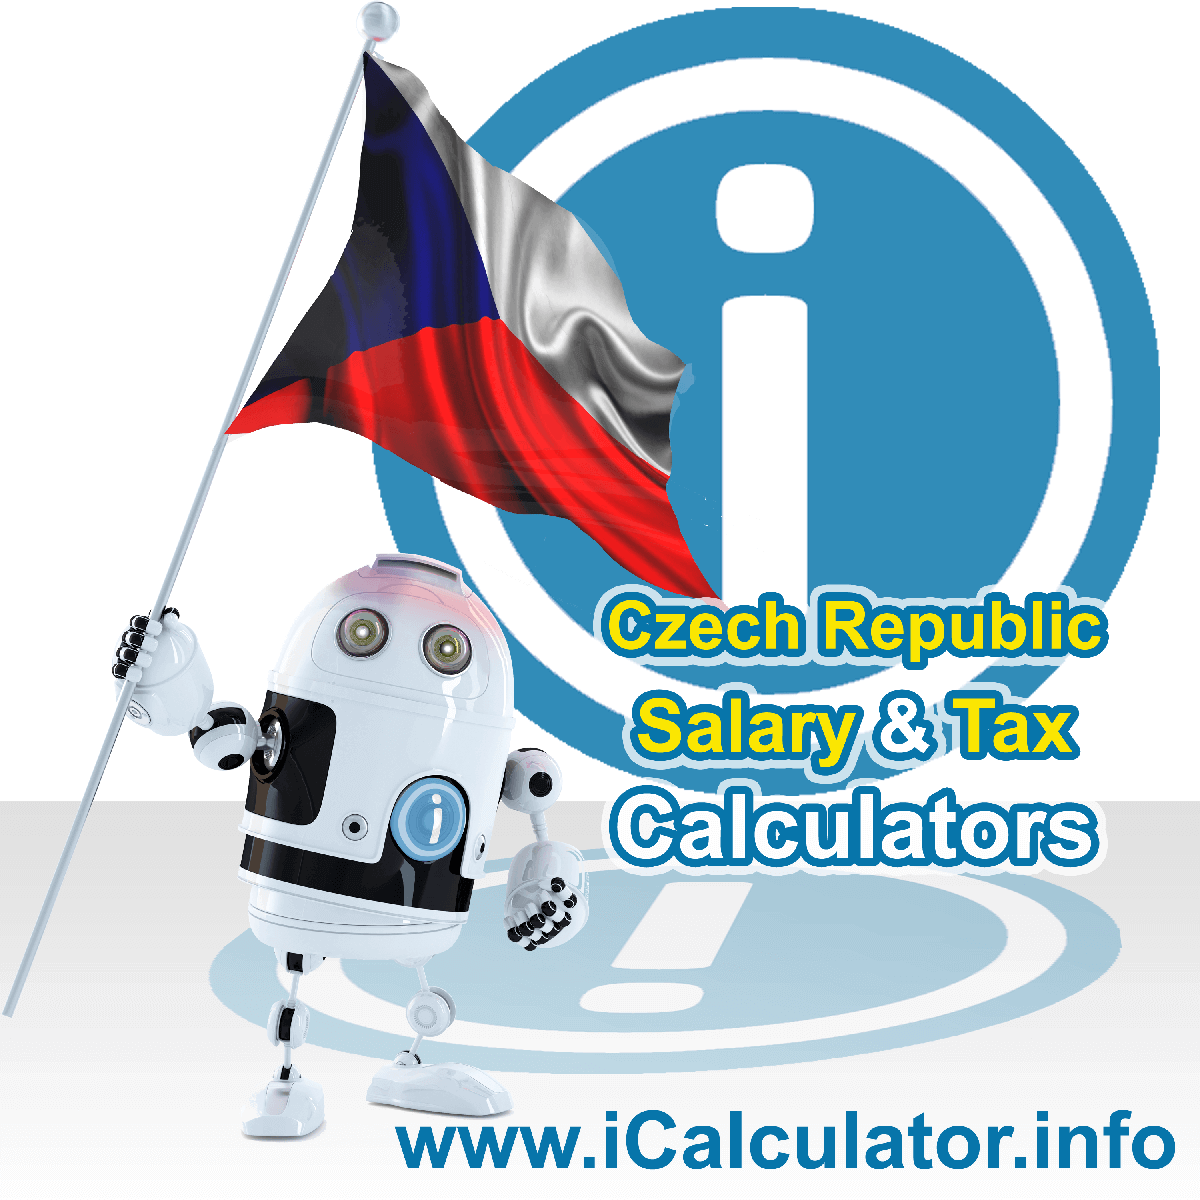 Czech Republic Tax Calculator. This image shows the Czech Republic flag and information relating to the tax formula for the Czech Republic Salary Calculator